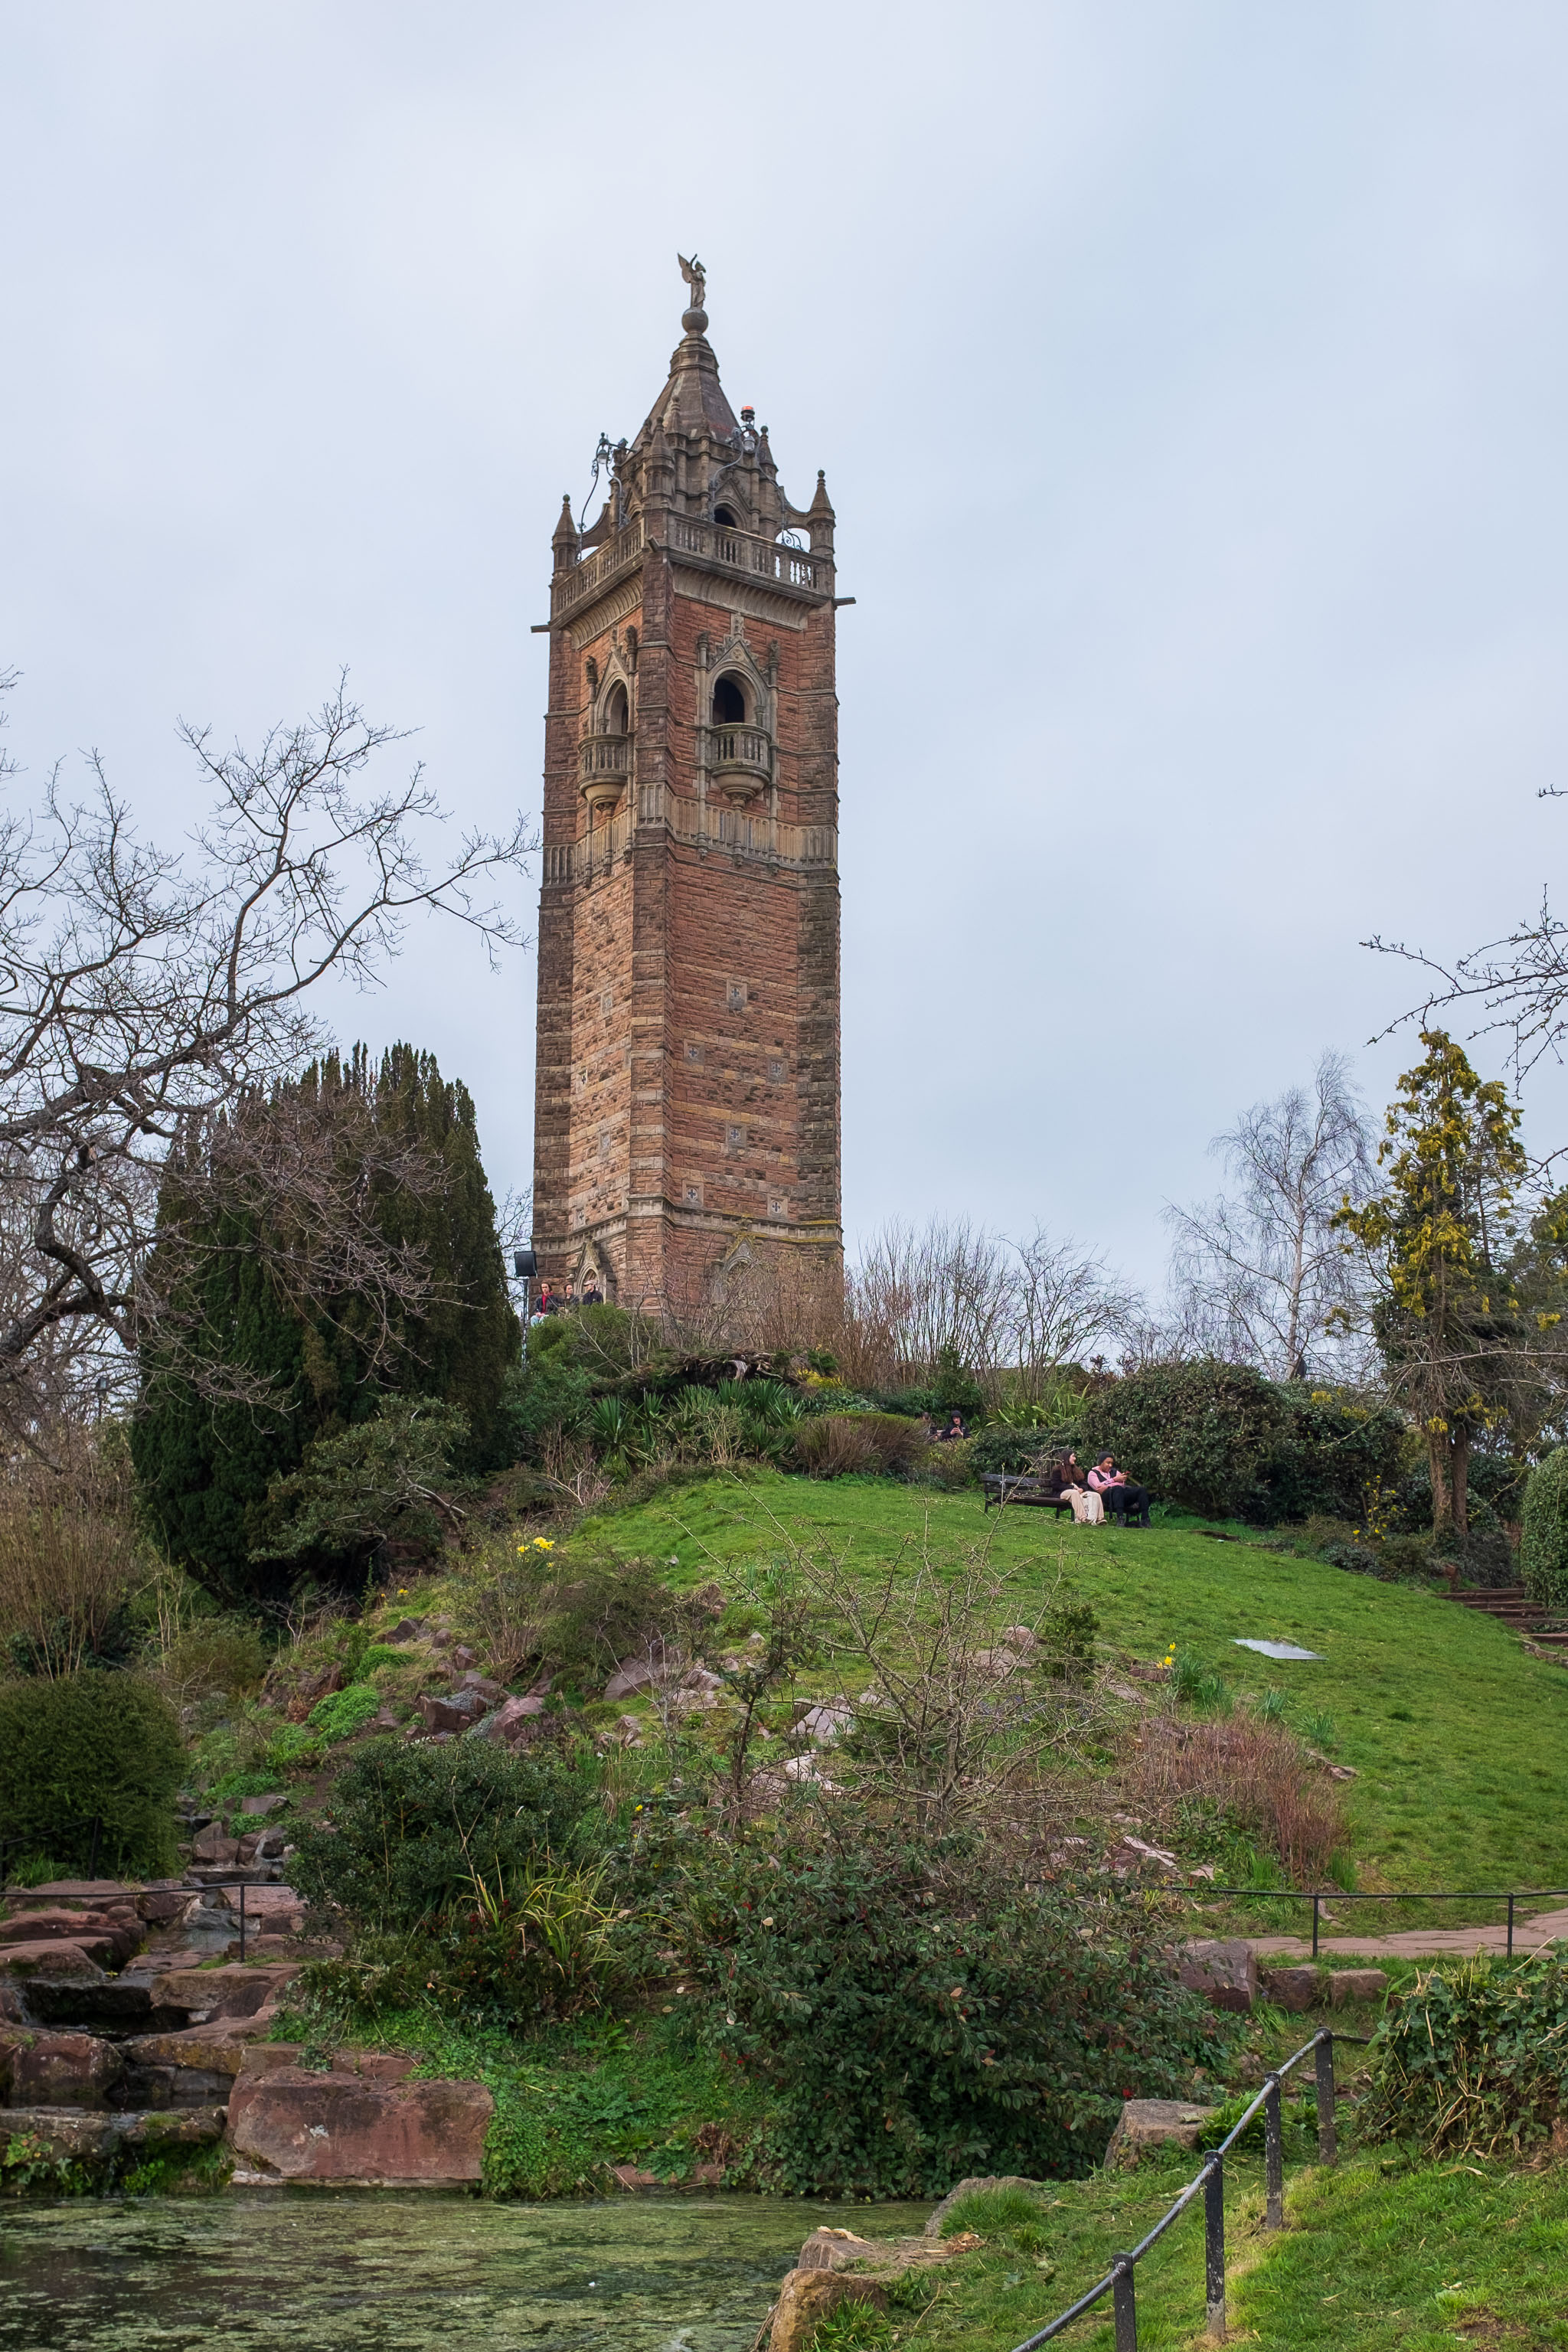 Cabot Tower
Built in the 1890s, funded by public subscription, to commemorate the 400th anniversary of the journey of John Cabot from Bristol to Newfoundland i...